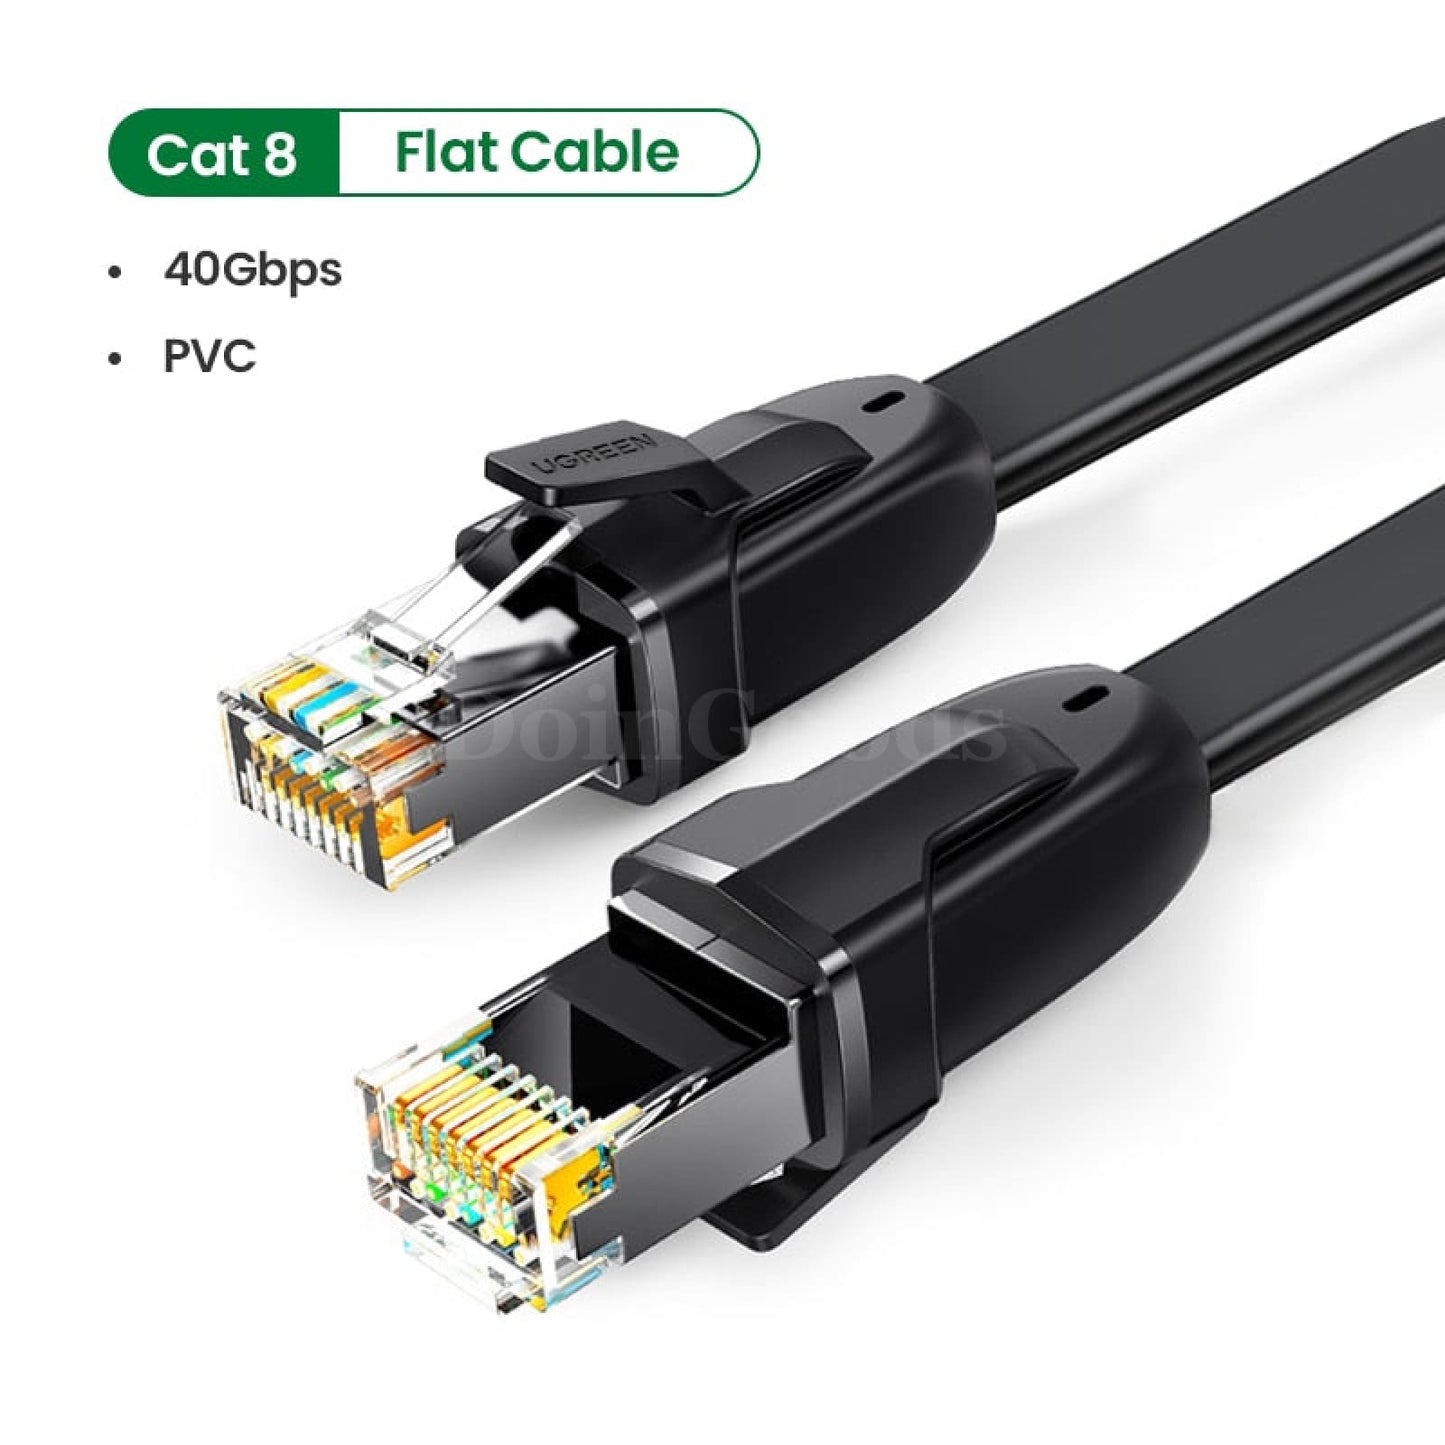 Ugreen Cat8 Ethernet Cable 40Gbps Rj45 Network For Ps4 Laptop Pc Router Cat 8 Pvc Black / 0.5M